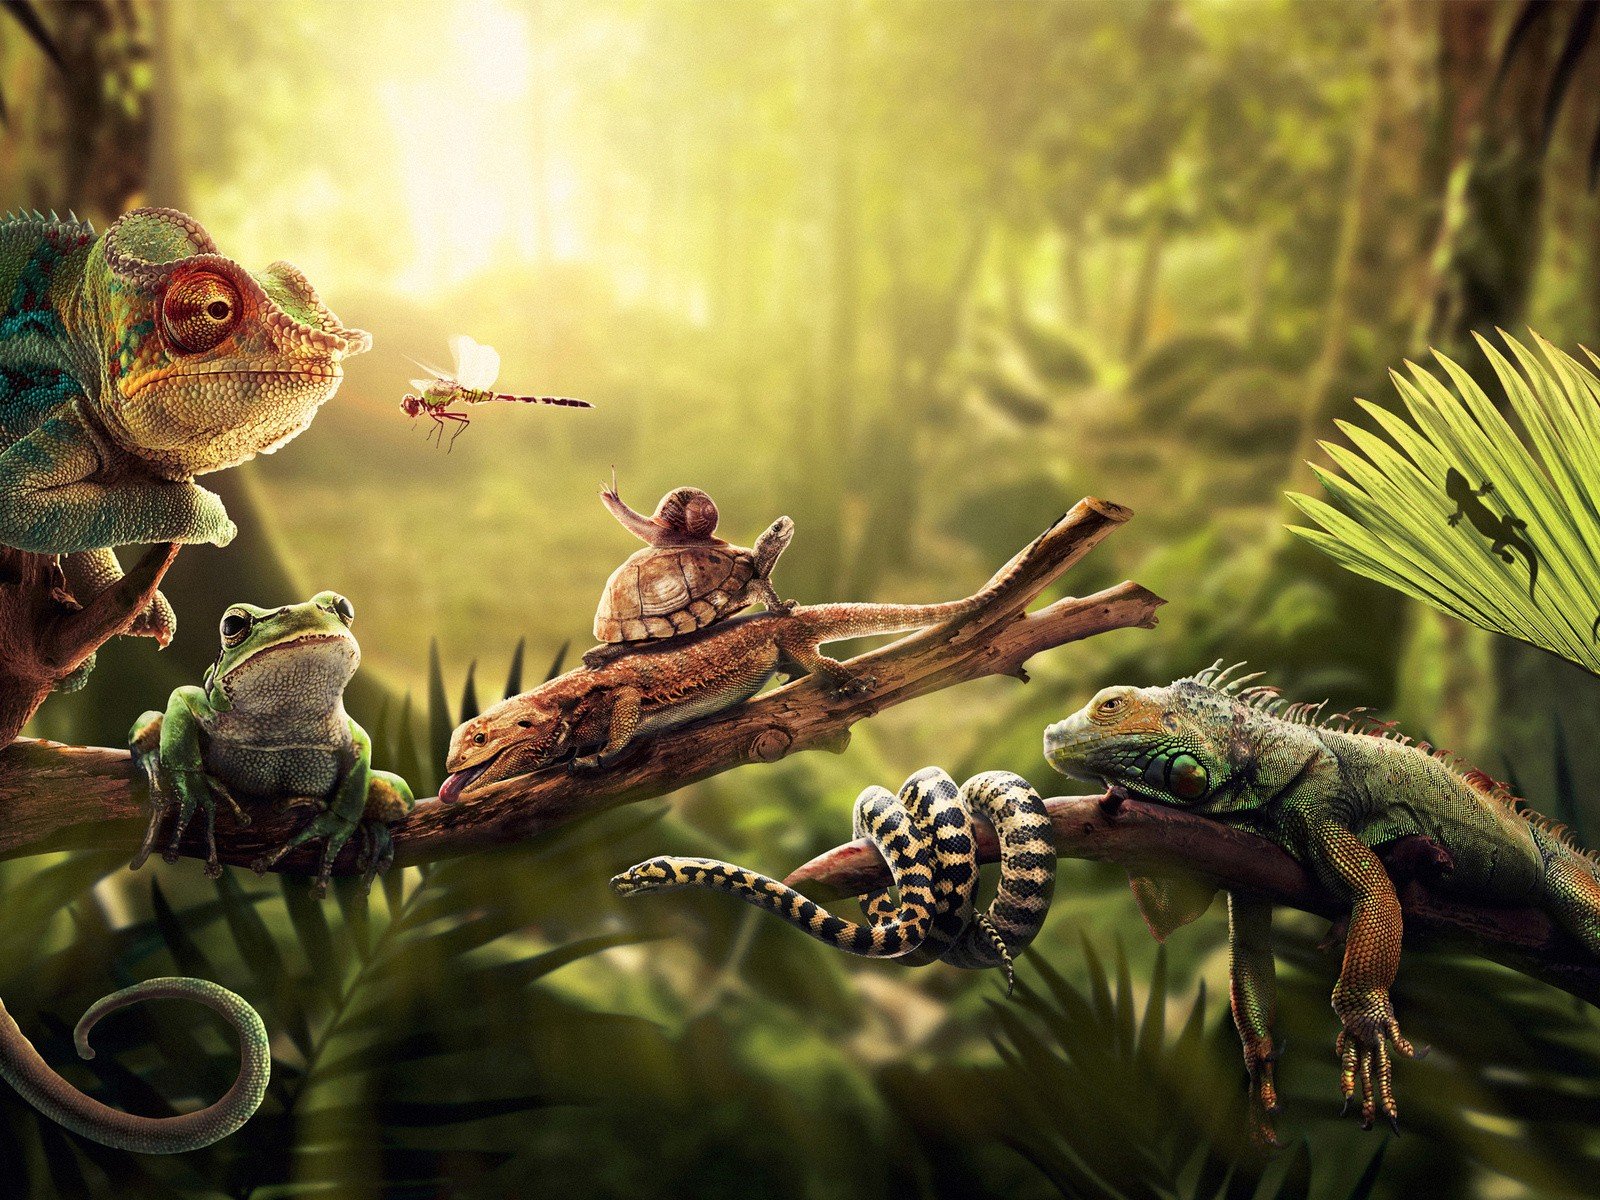 forests, Insects, Chameleons, Turtles, Snakes, Frogs, Snails, Reptiles, Iguana, Amphibians, Palm, Leaves Wallpaper